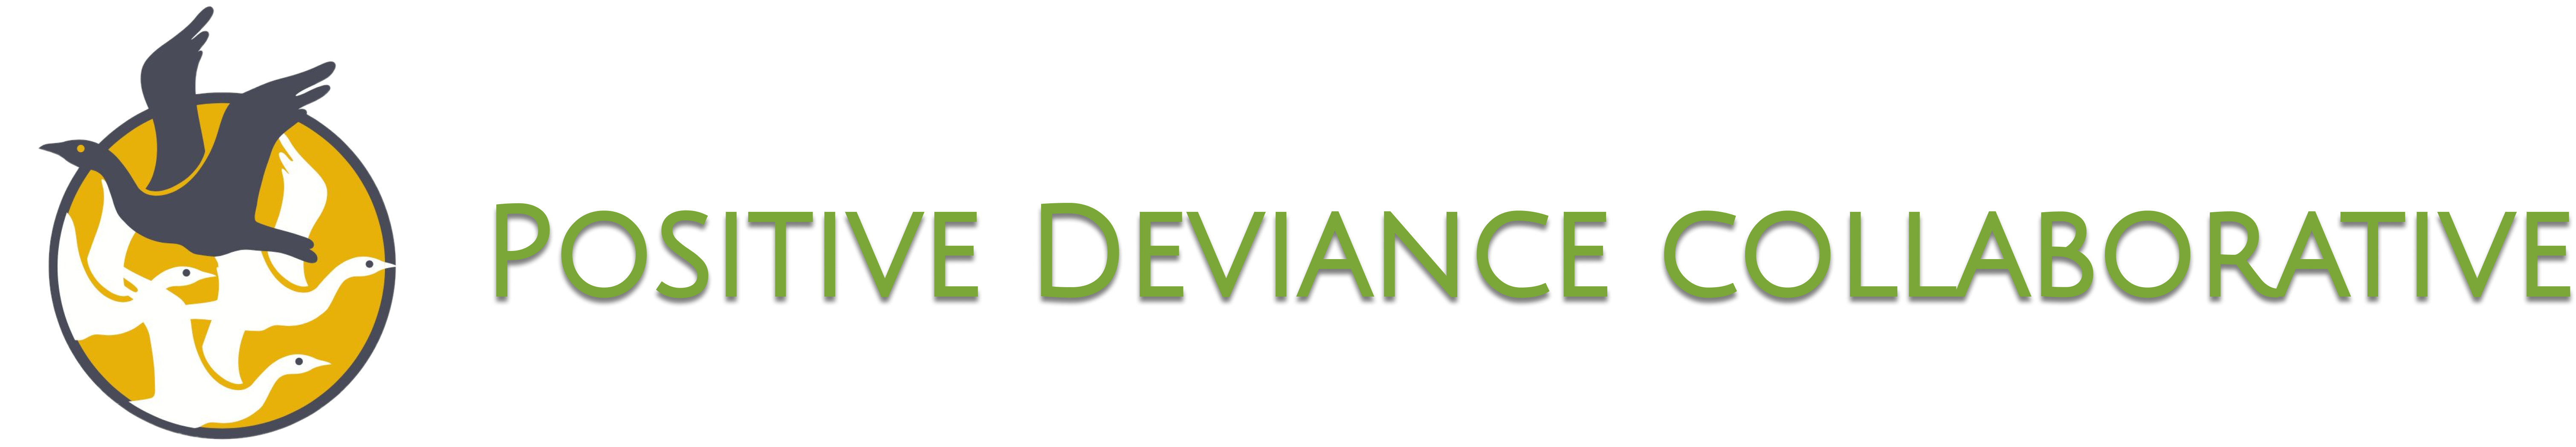 In this special edition issue, we announce the renaming of the Positive Deviance Initiative to the
Positive Deviance Collaborative.